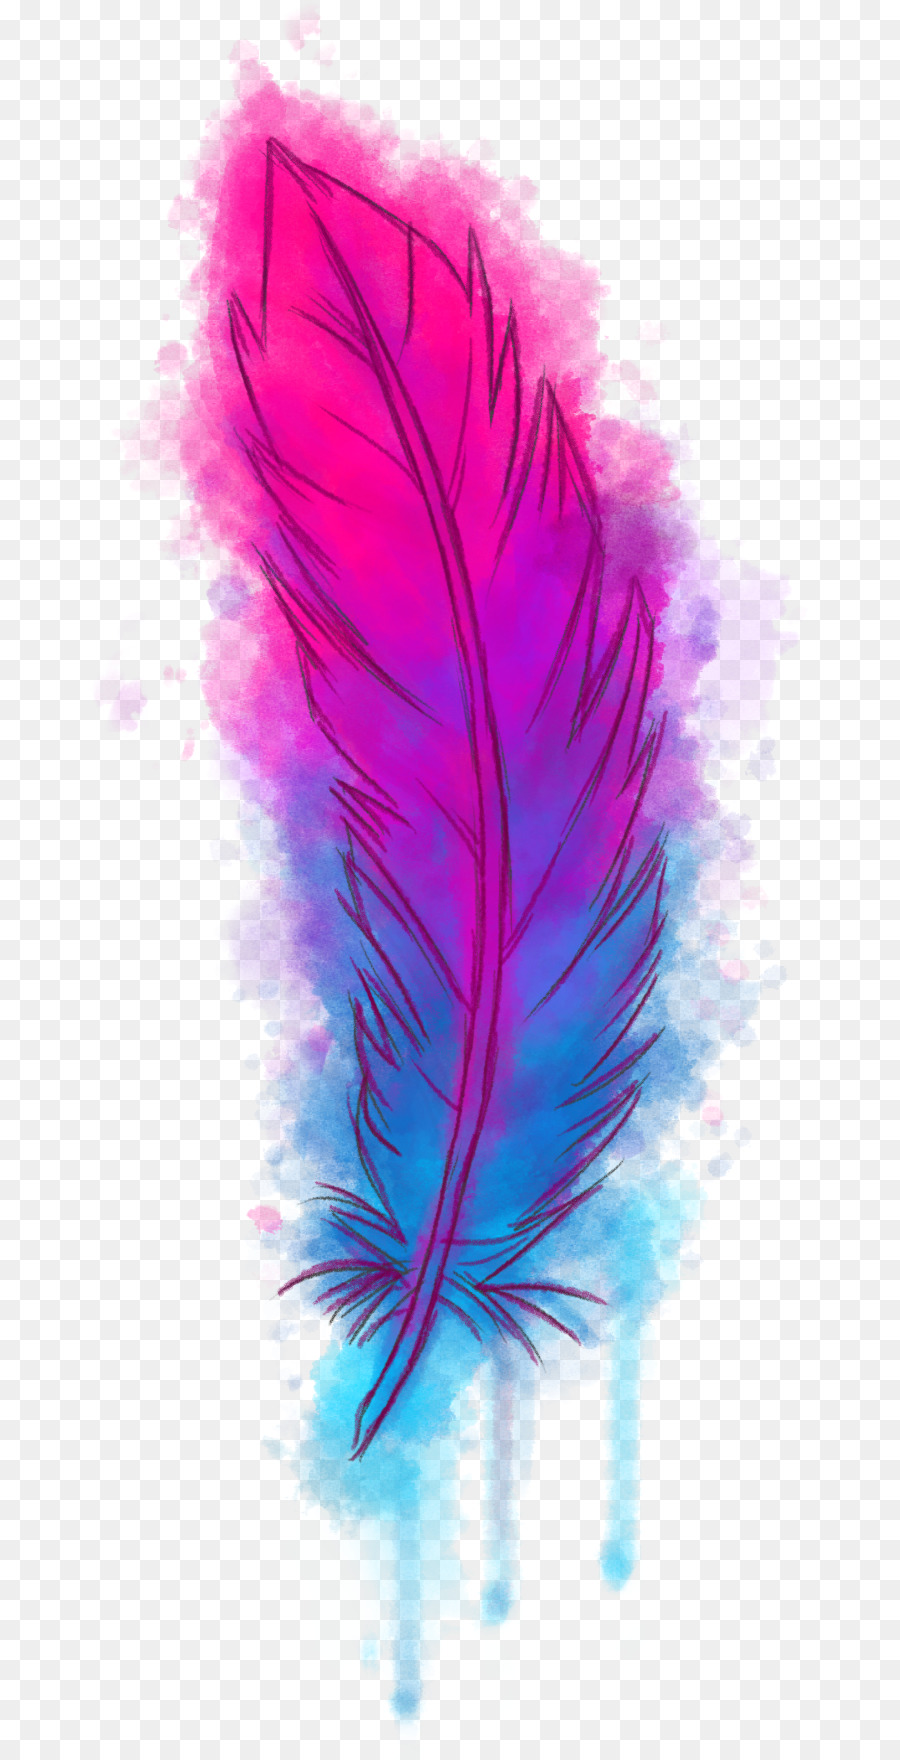 Feather Drawing Sticker Watercolor painting - Watercolour PNG Transparent png download - 717*1760 - Free Transparent Watercolor Flowers png Download.